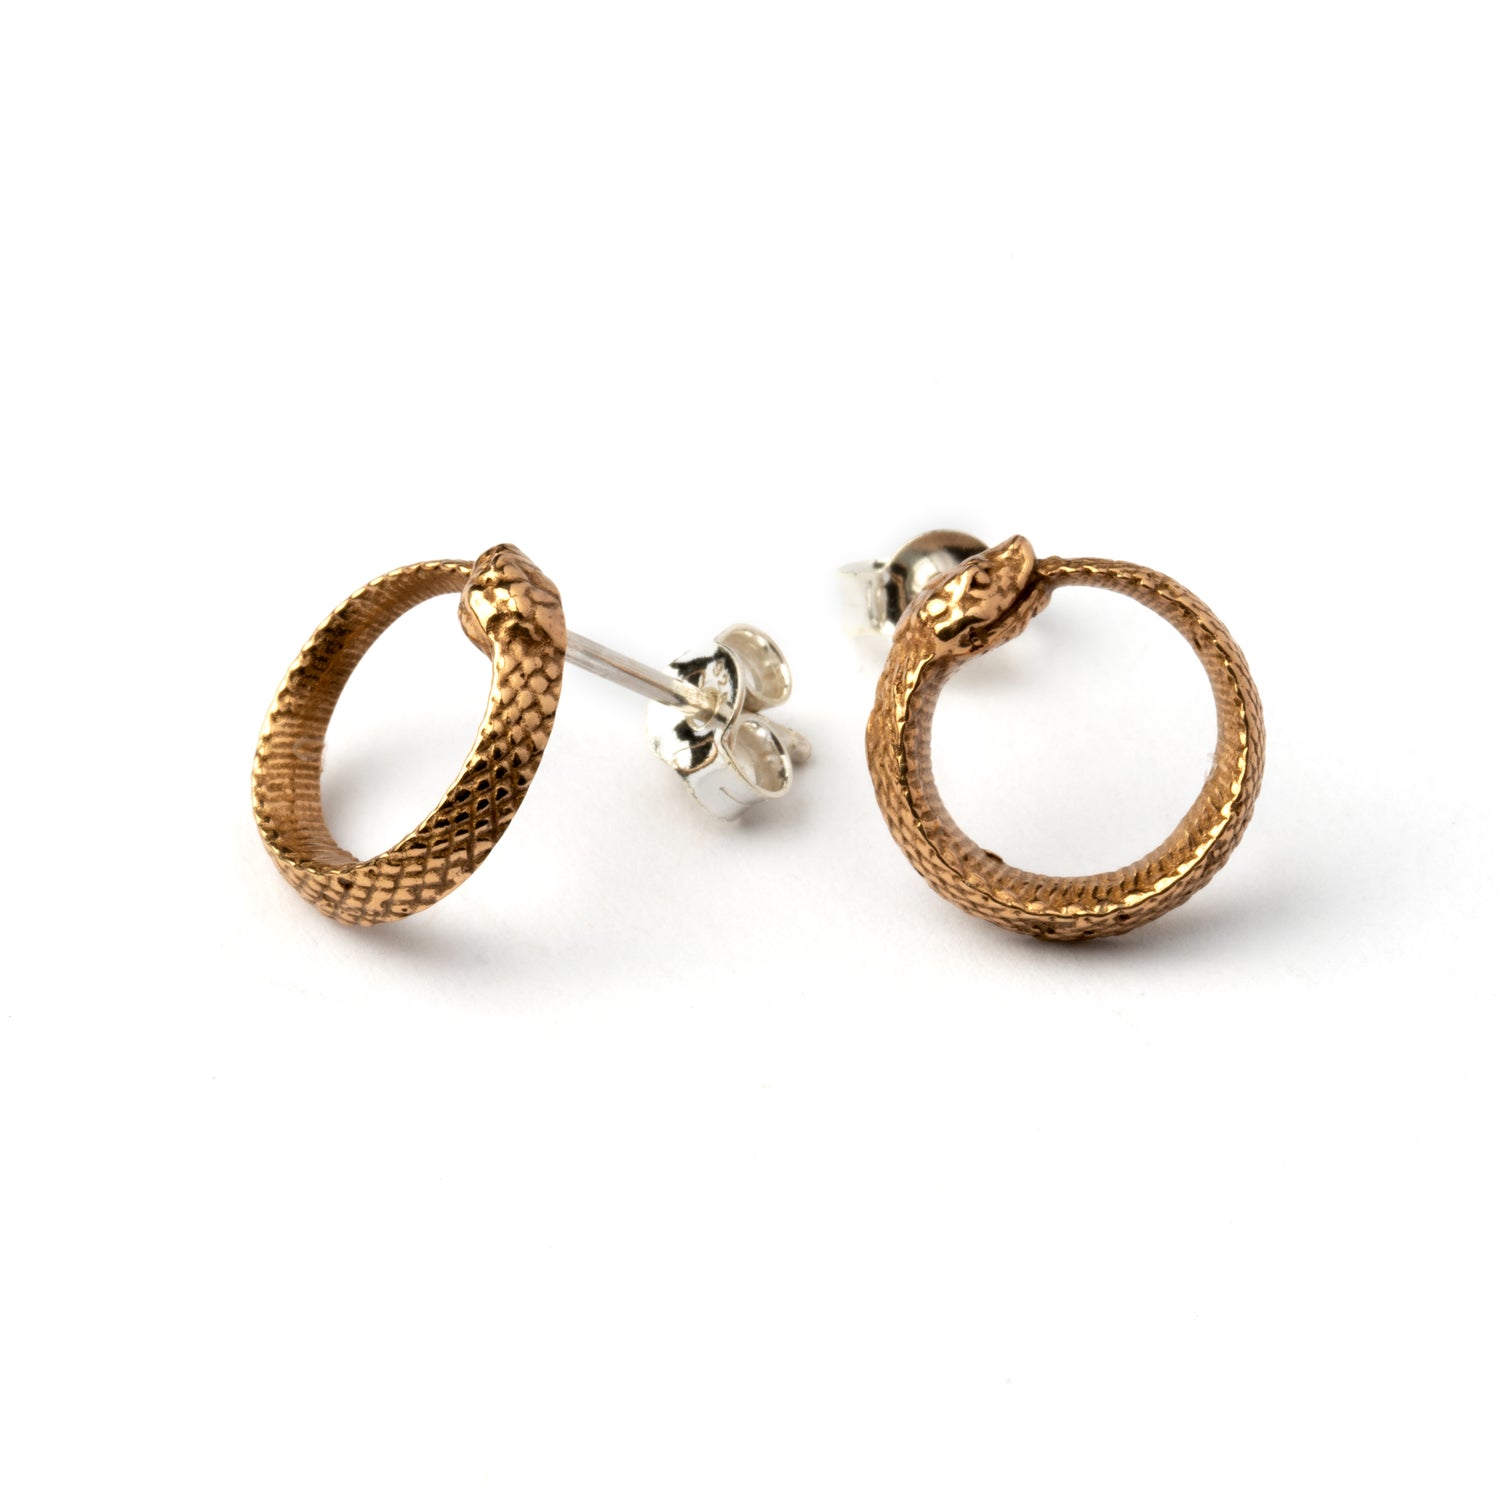 Ouroboros snake Bronze Ear Studs front and back view